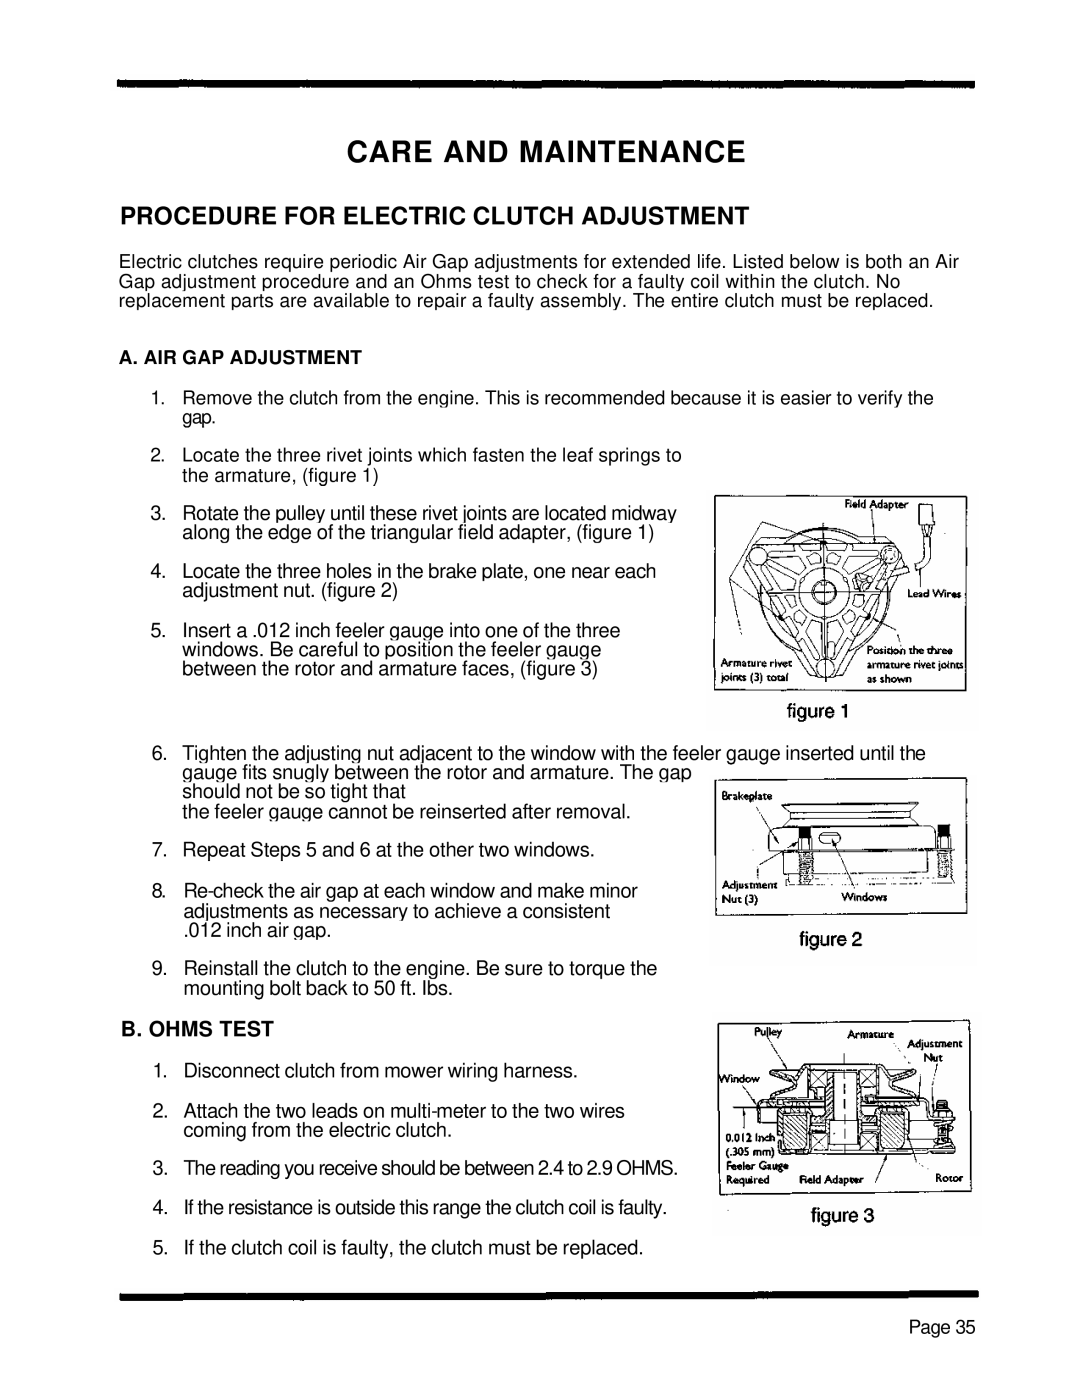 Dixon 5000 Series manual Care And Maintenance, Procedure For Electric Clutch Adjustment, B. Ohms Test 